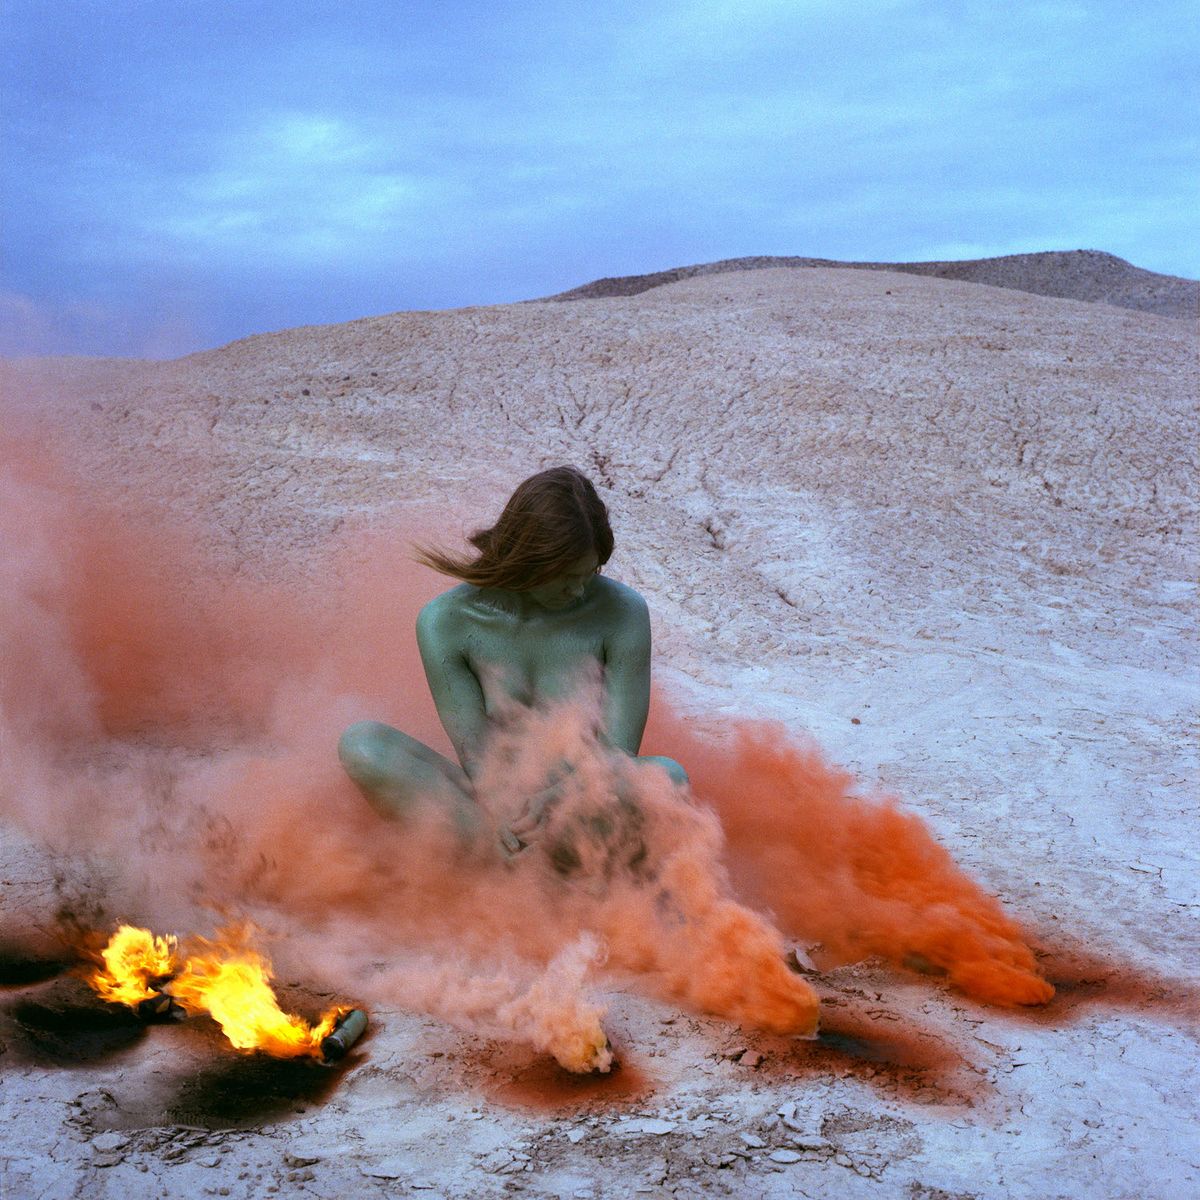 Judy Chicago, Immolation from Women and Smoke, 1972 © Judy Chicago/Artists Rights Society (ARS), New York. Photo courtesy of Through the Flower Archives, the artist, Salon 94 and Jessica Silverman Gallery